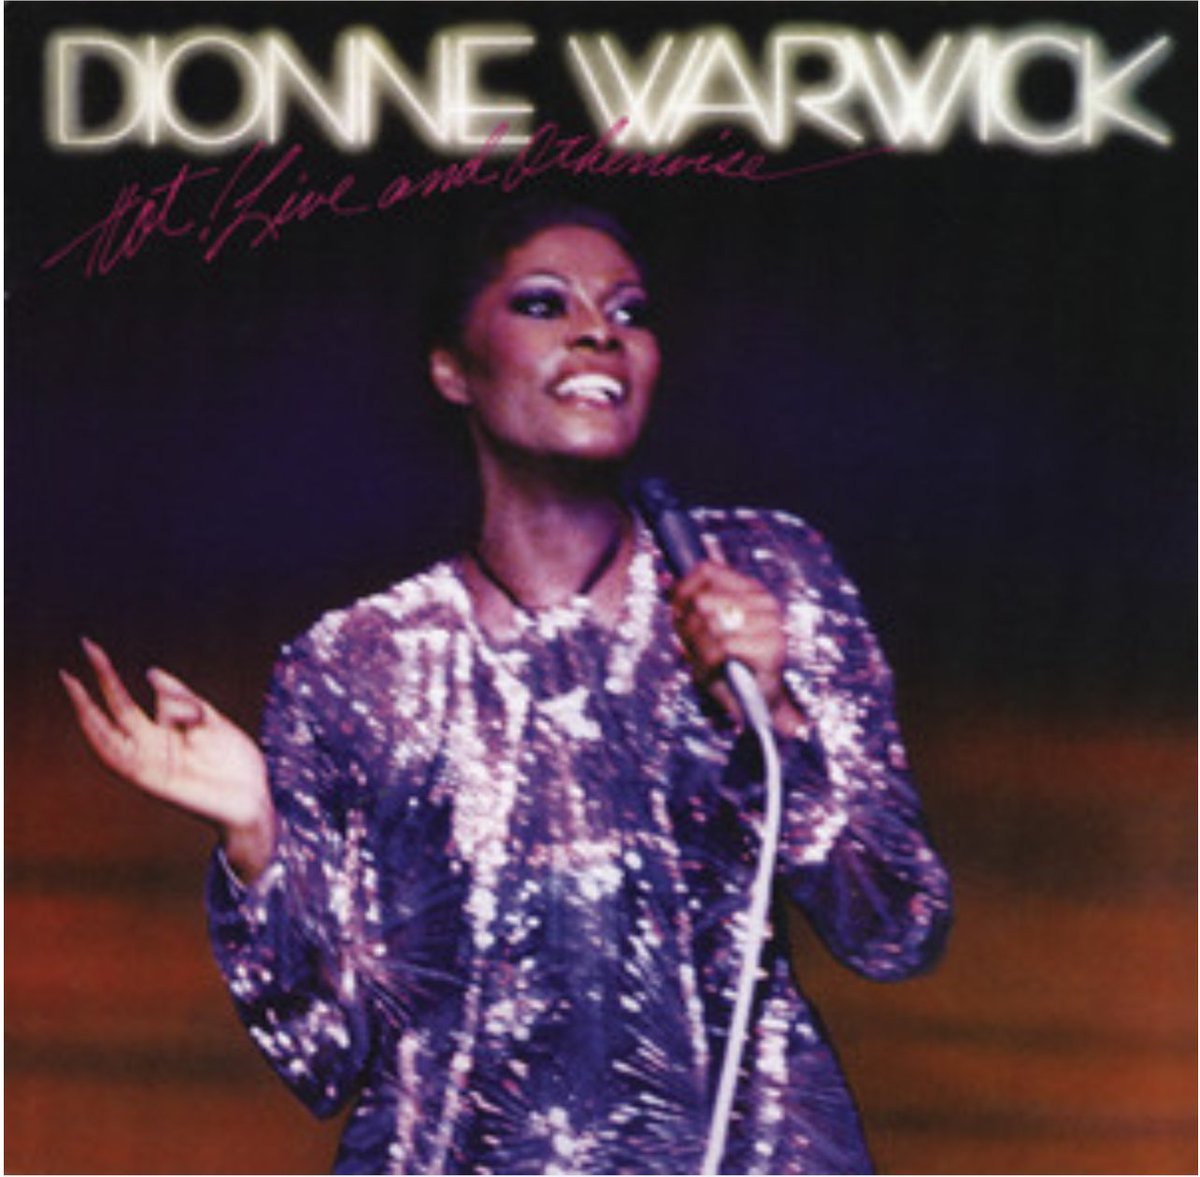 Today in 1981, the #DionneWarwick album “Hot! Live & Otherwise” was released. The live portion was definitely Hot! The otherwise, consisting of new studio recordings, was powerful and beautiful. A+ @dionnewarwick